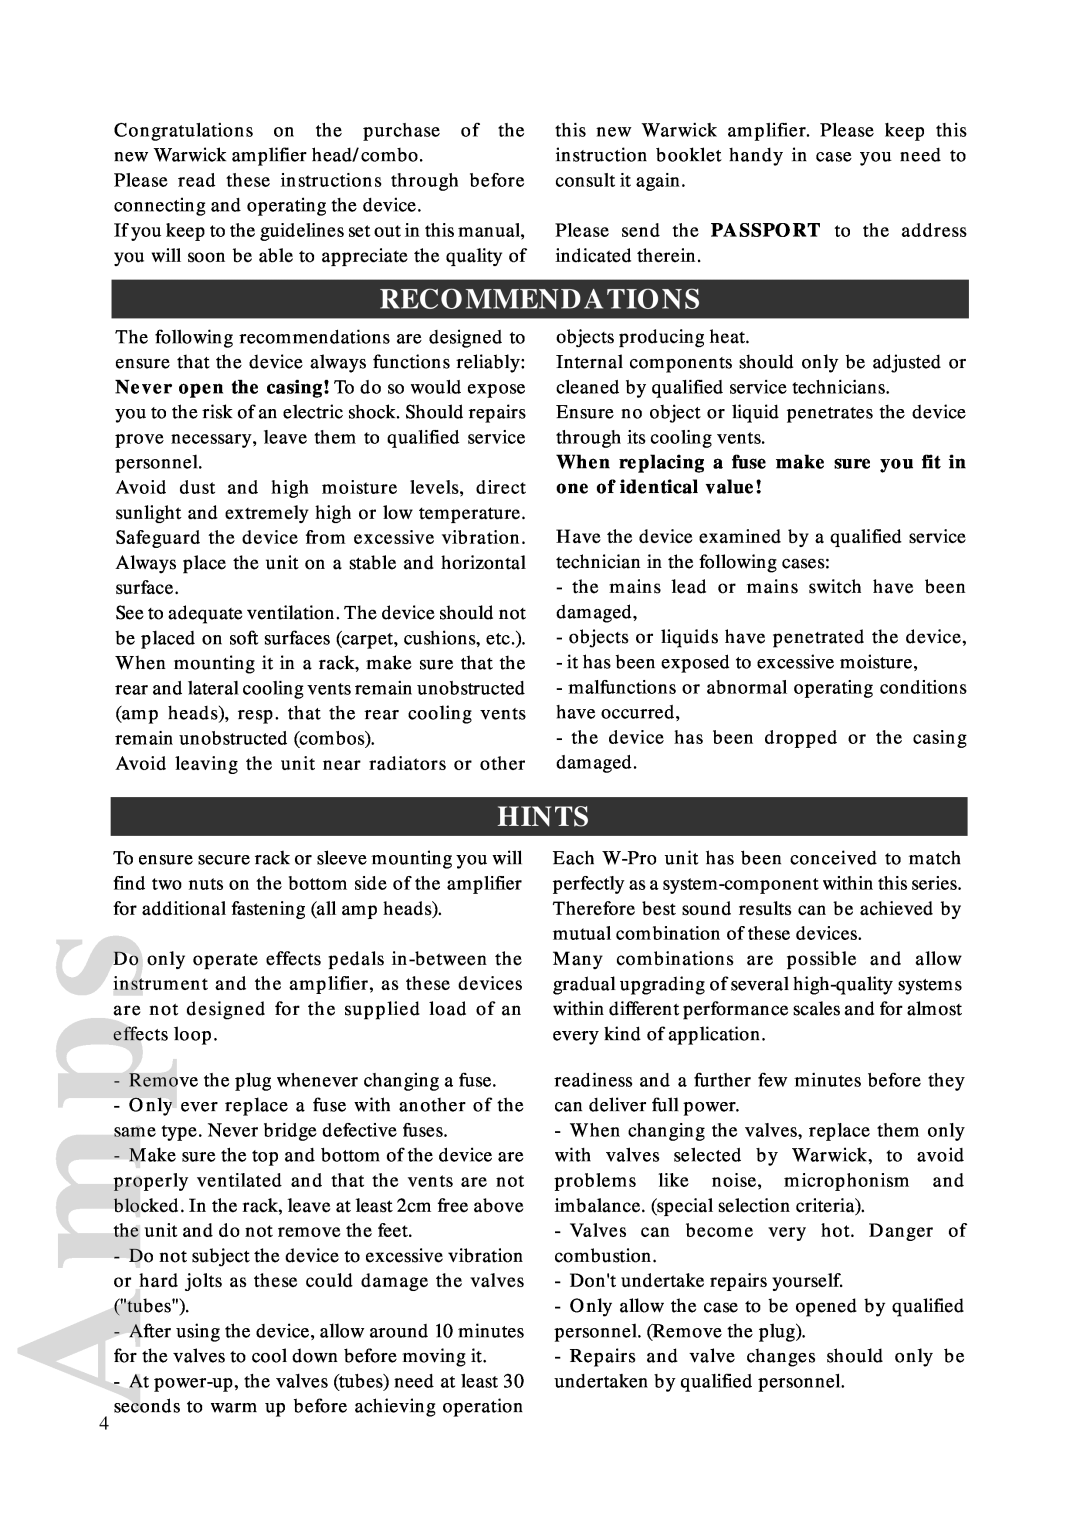 Warwick AMPs owner manual Recommendations, Hints 